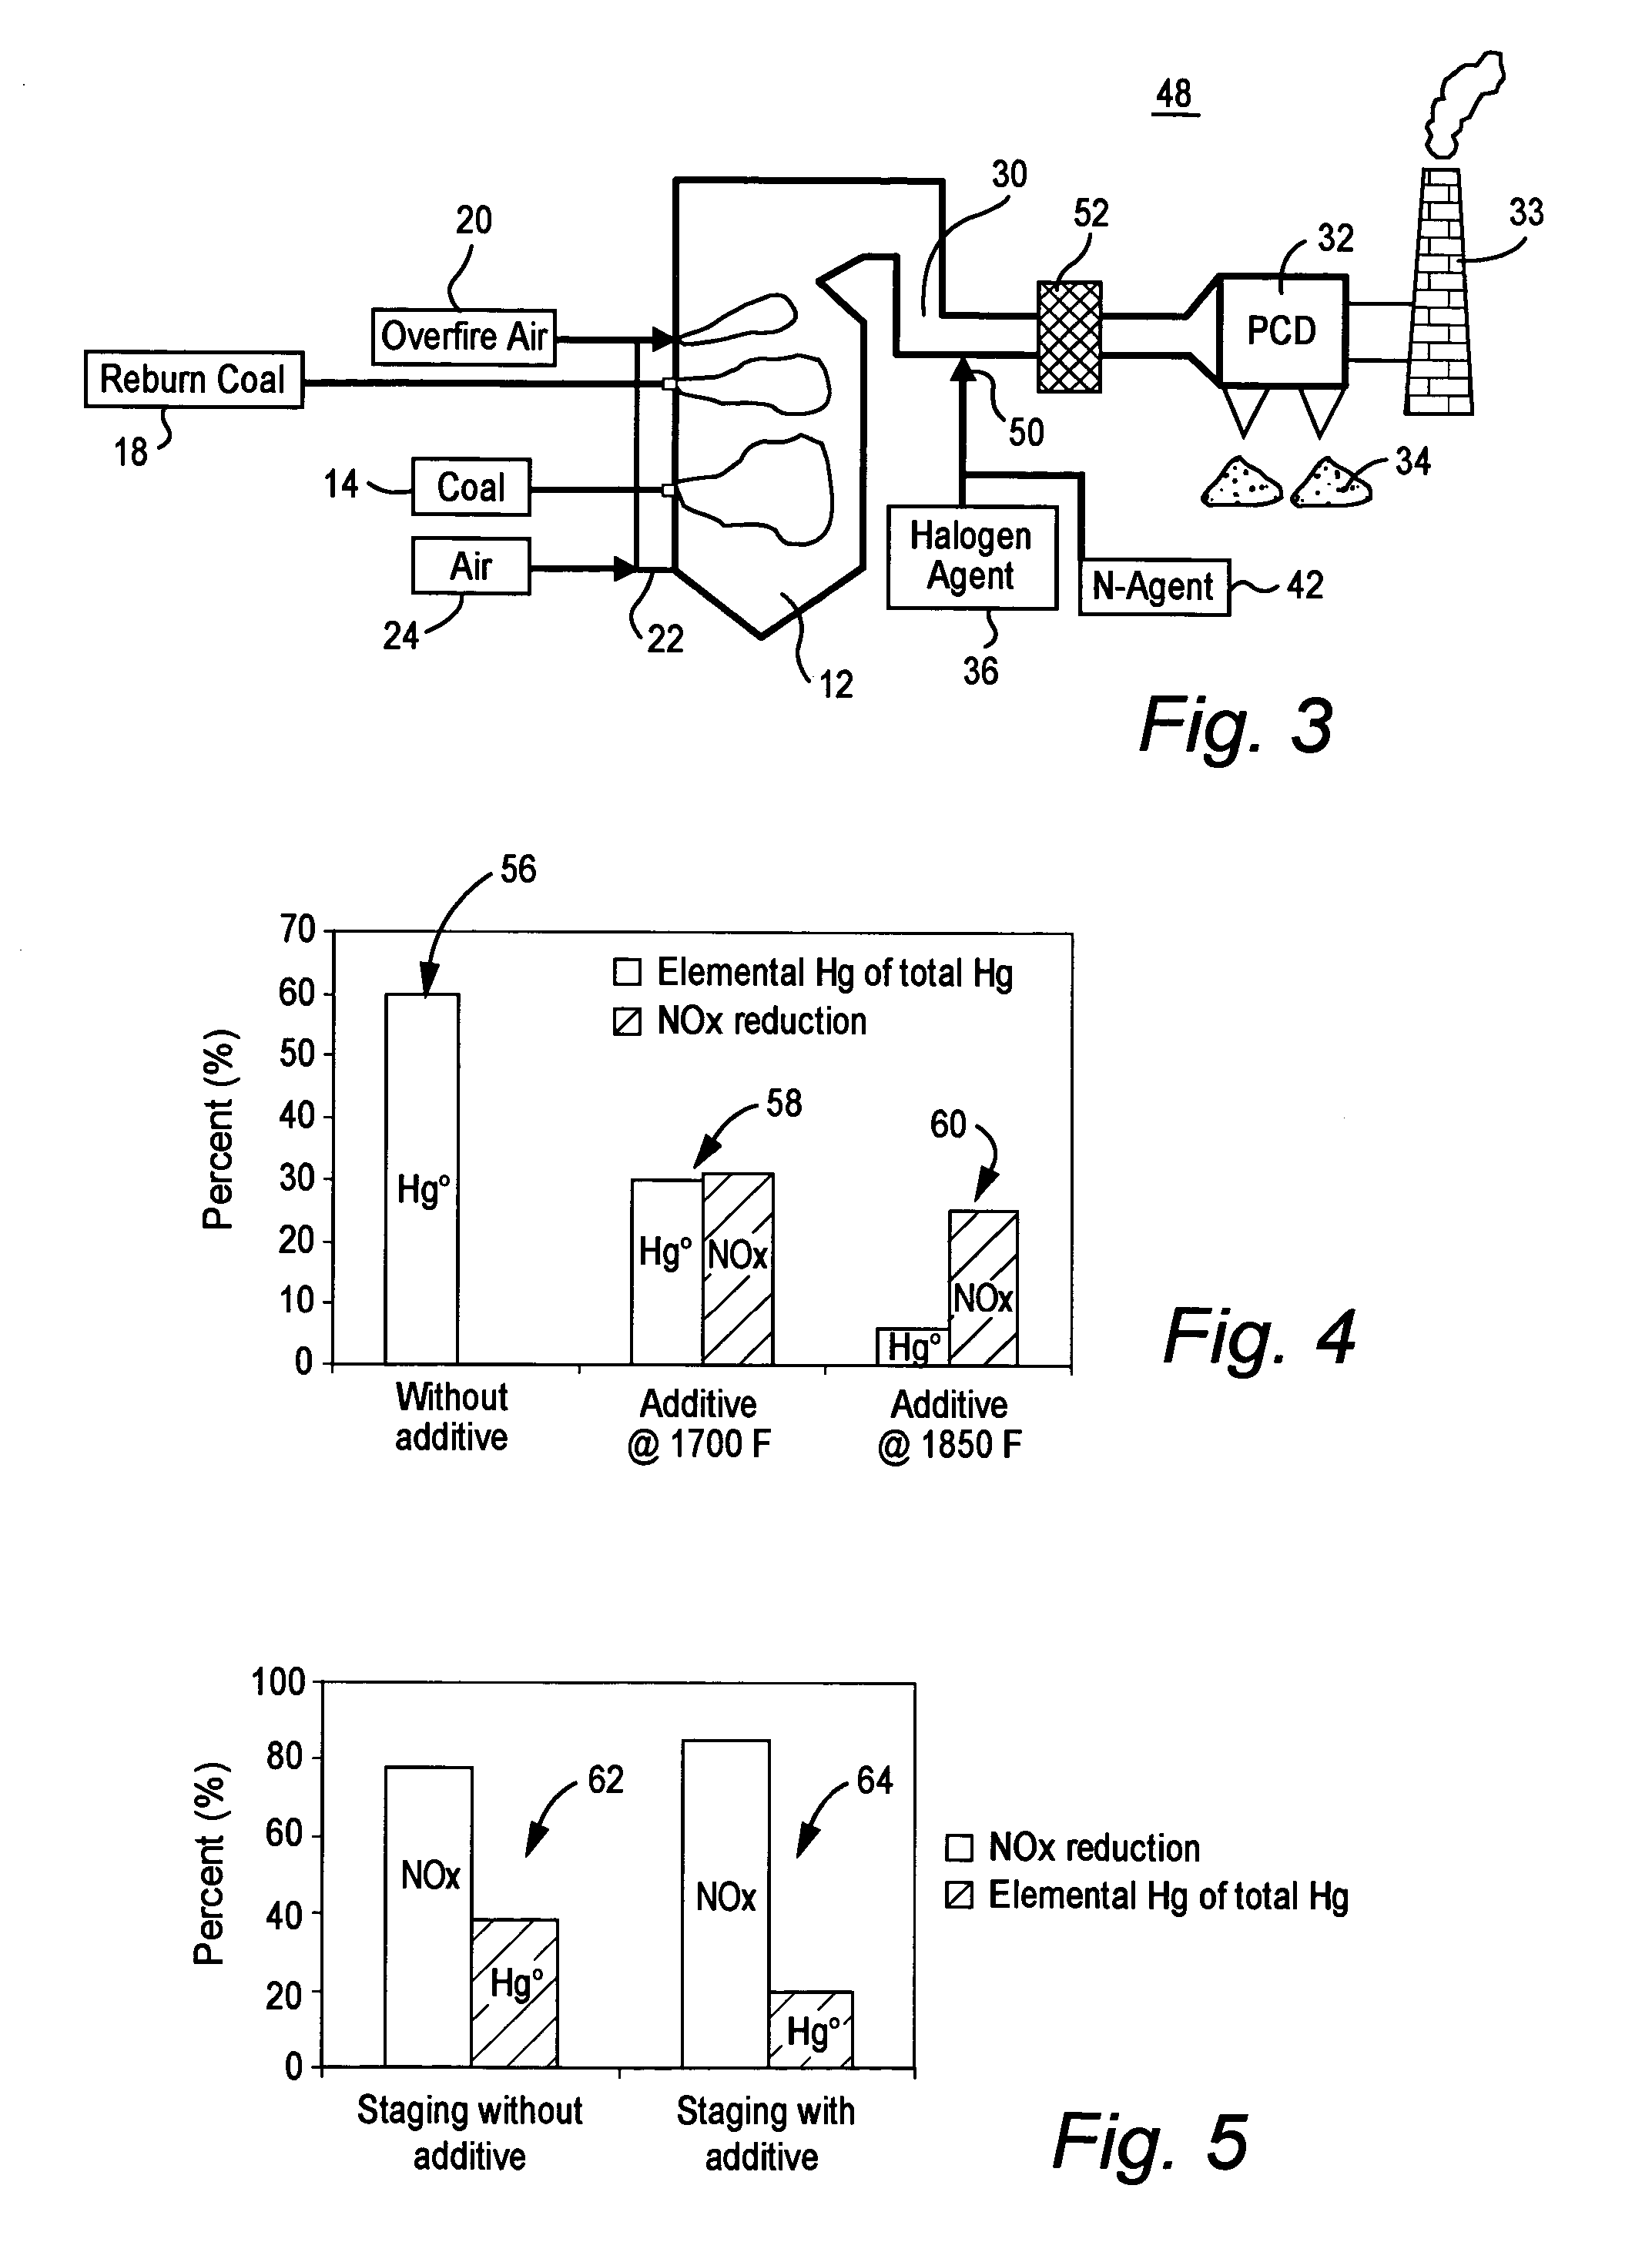 Method for removal of mercury emissions from coal combustion